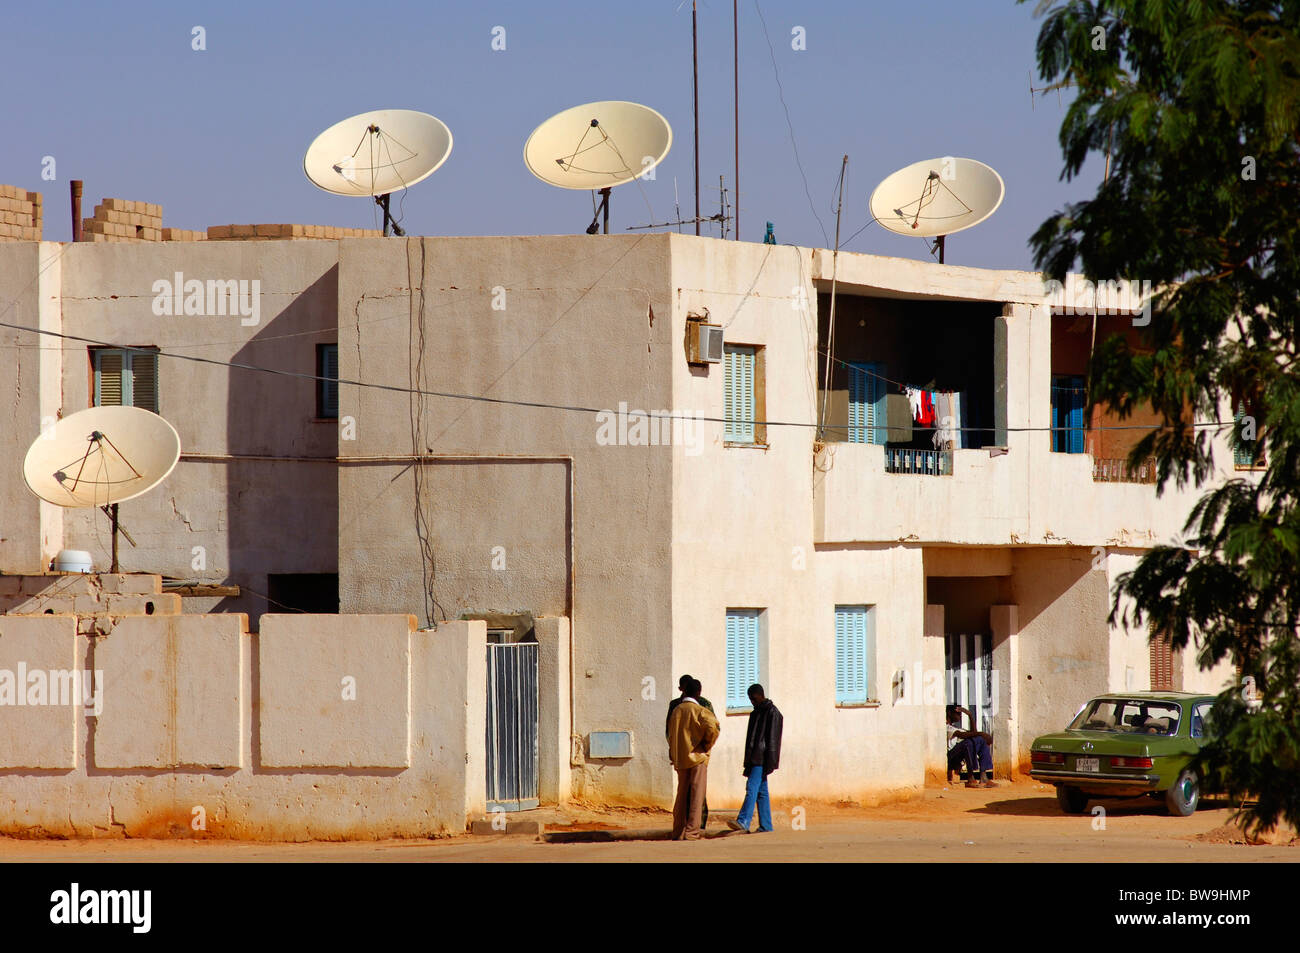 Modern residential buildings with satellite dishes on the roof in the town of Jerma, Libya Stock Photo